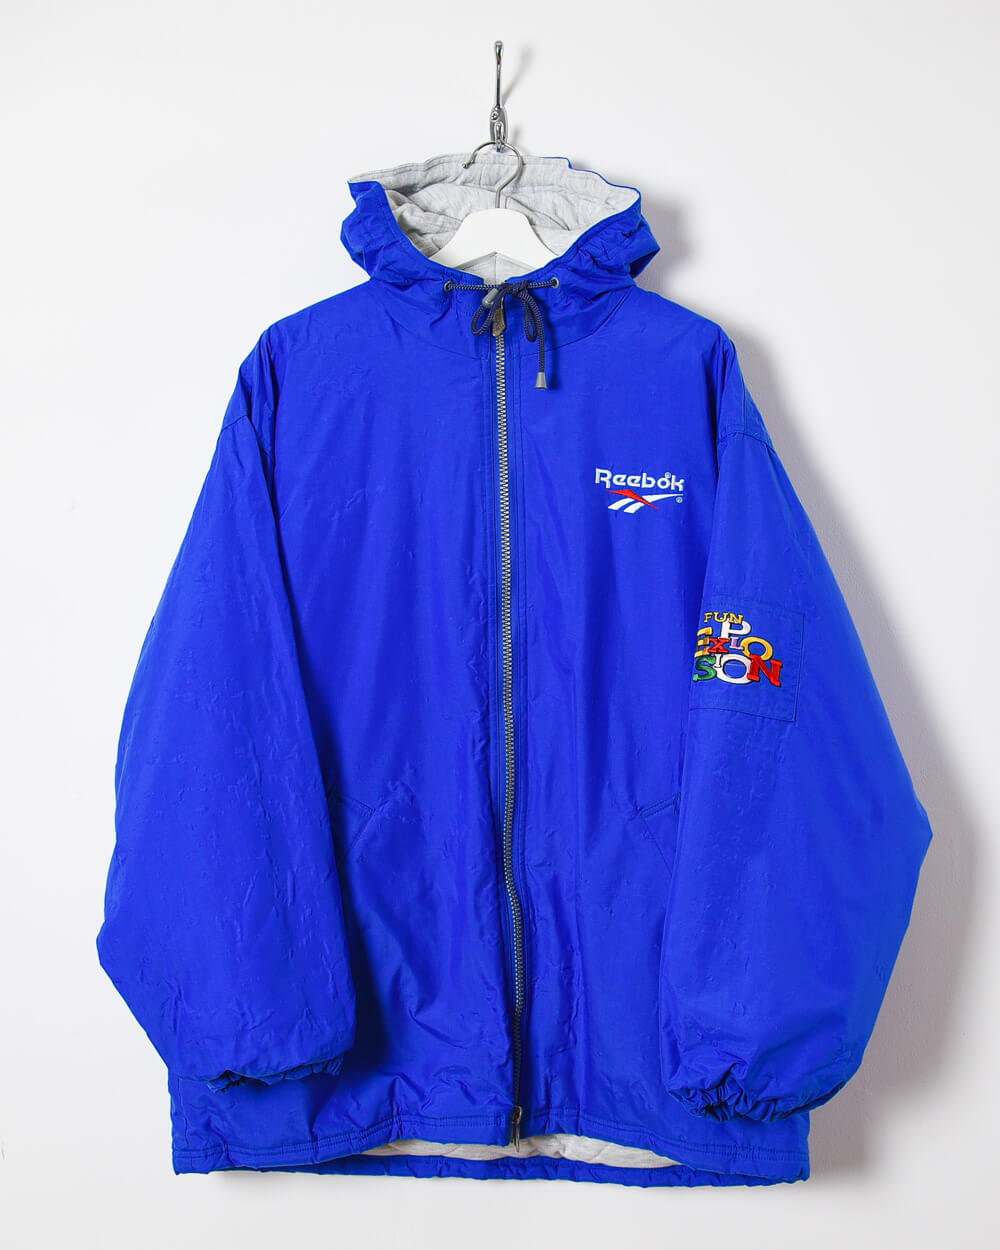 Reebok Hooded Winter Coat - X-Large - Domno Vintage 90s, 80s, 00s Retro and Vintage Clothing